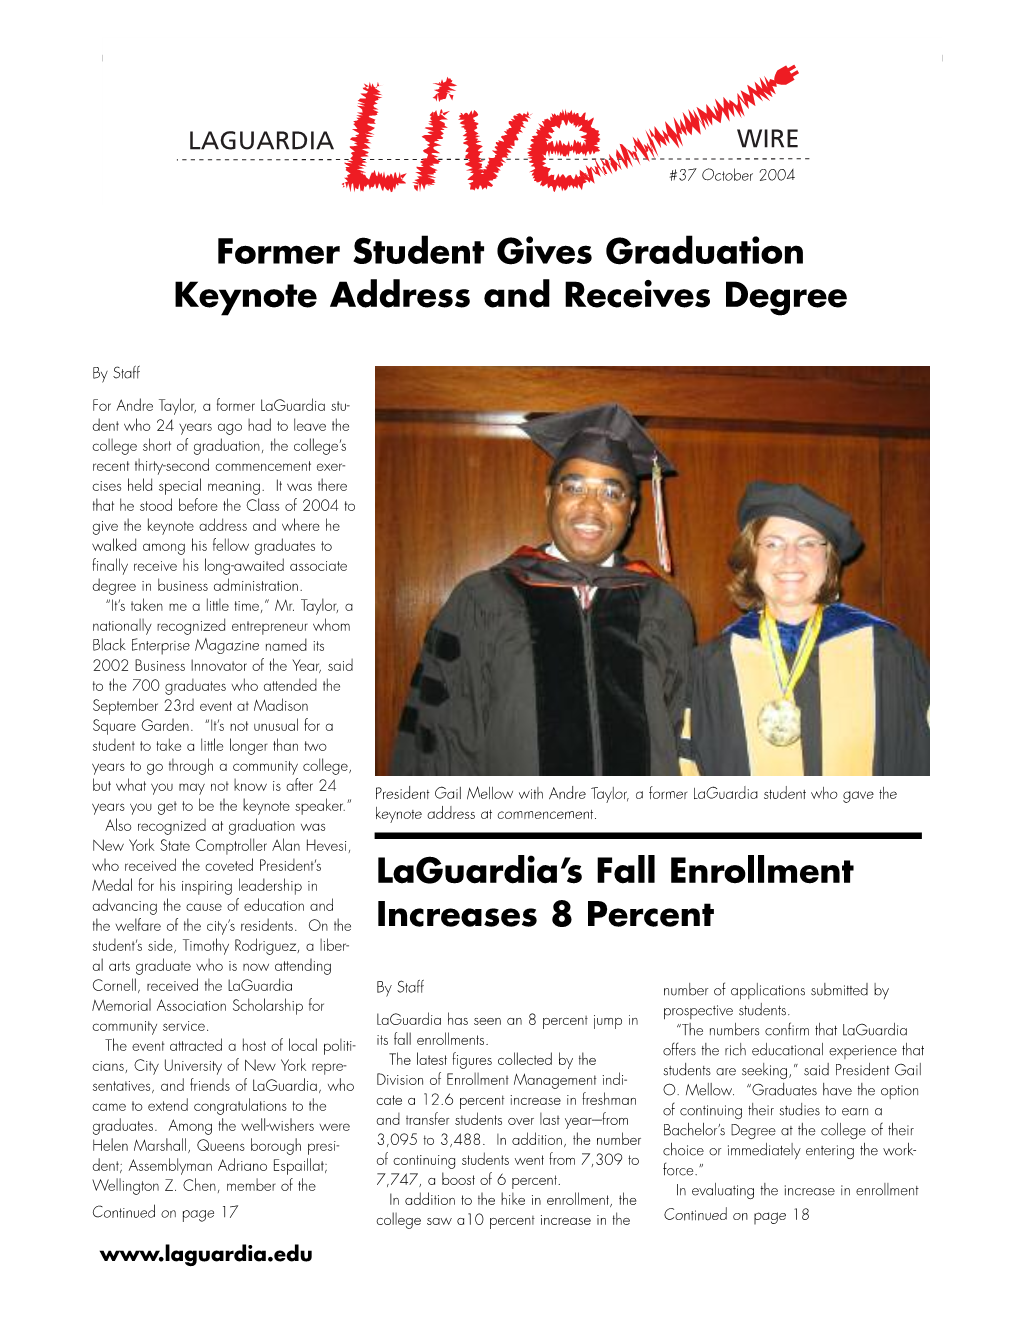 Former Student Gives Graduation Keynote Address and Receives Degree